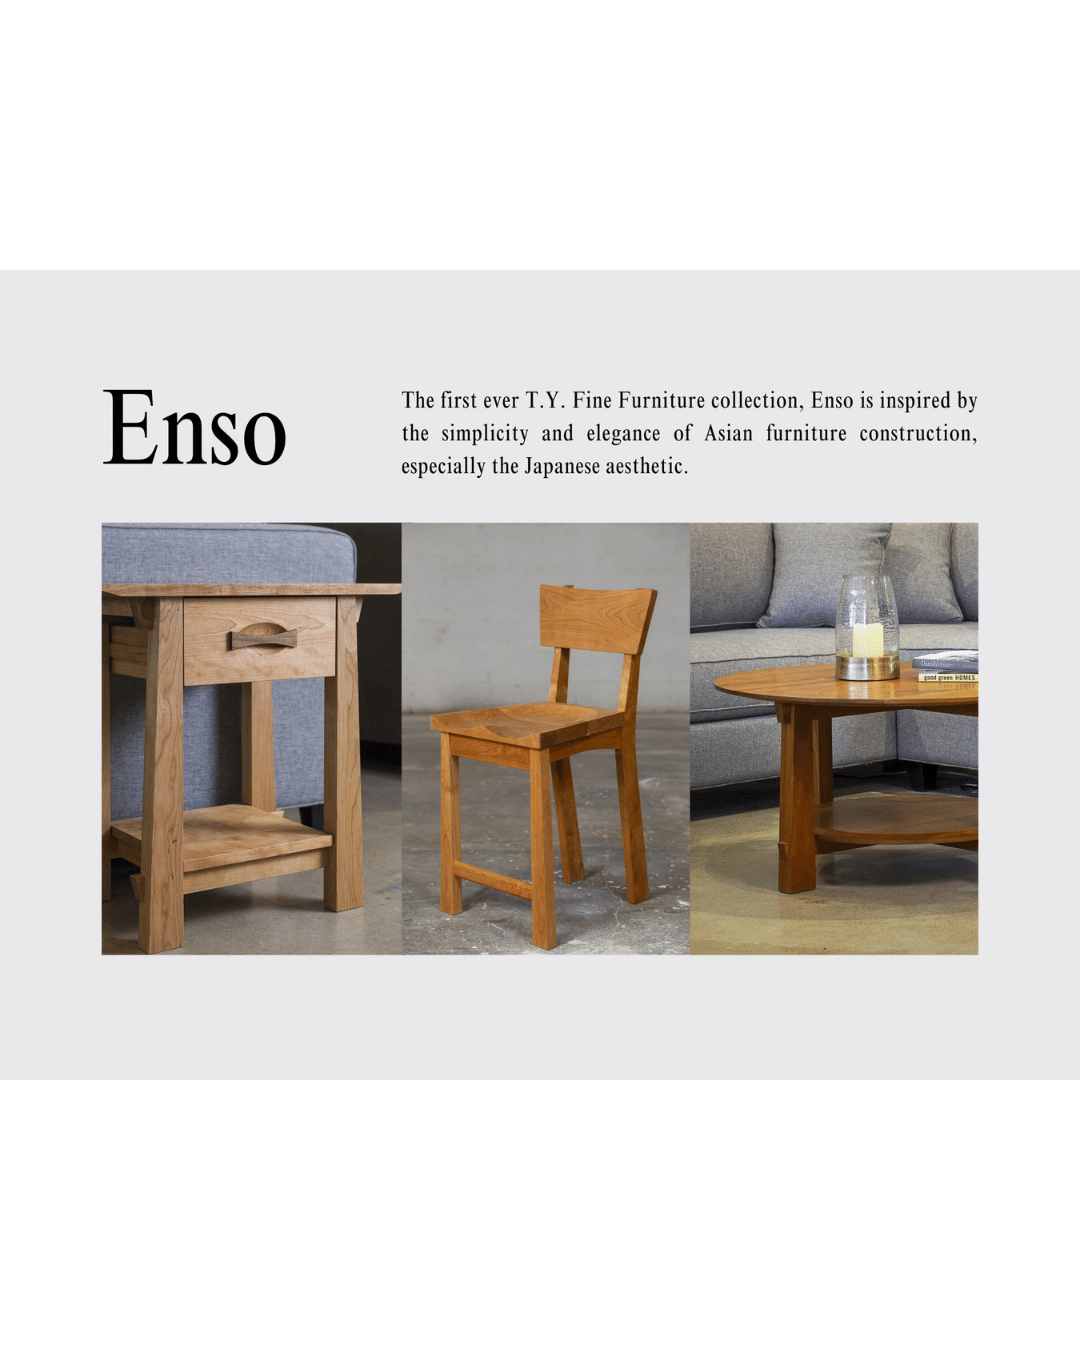 Enso Upright Dresser - Solid Wood, Handmade, and Organic